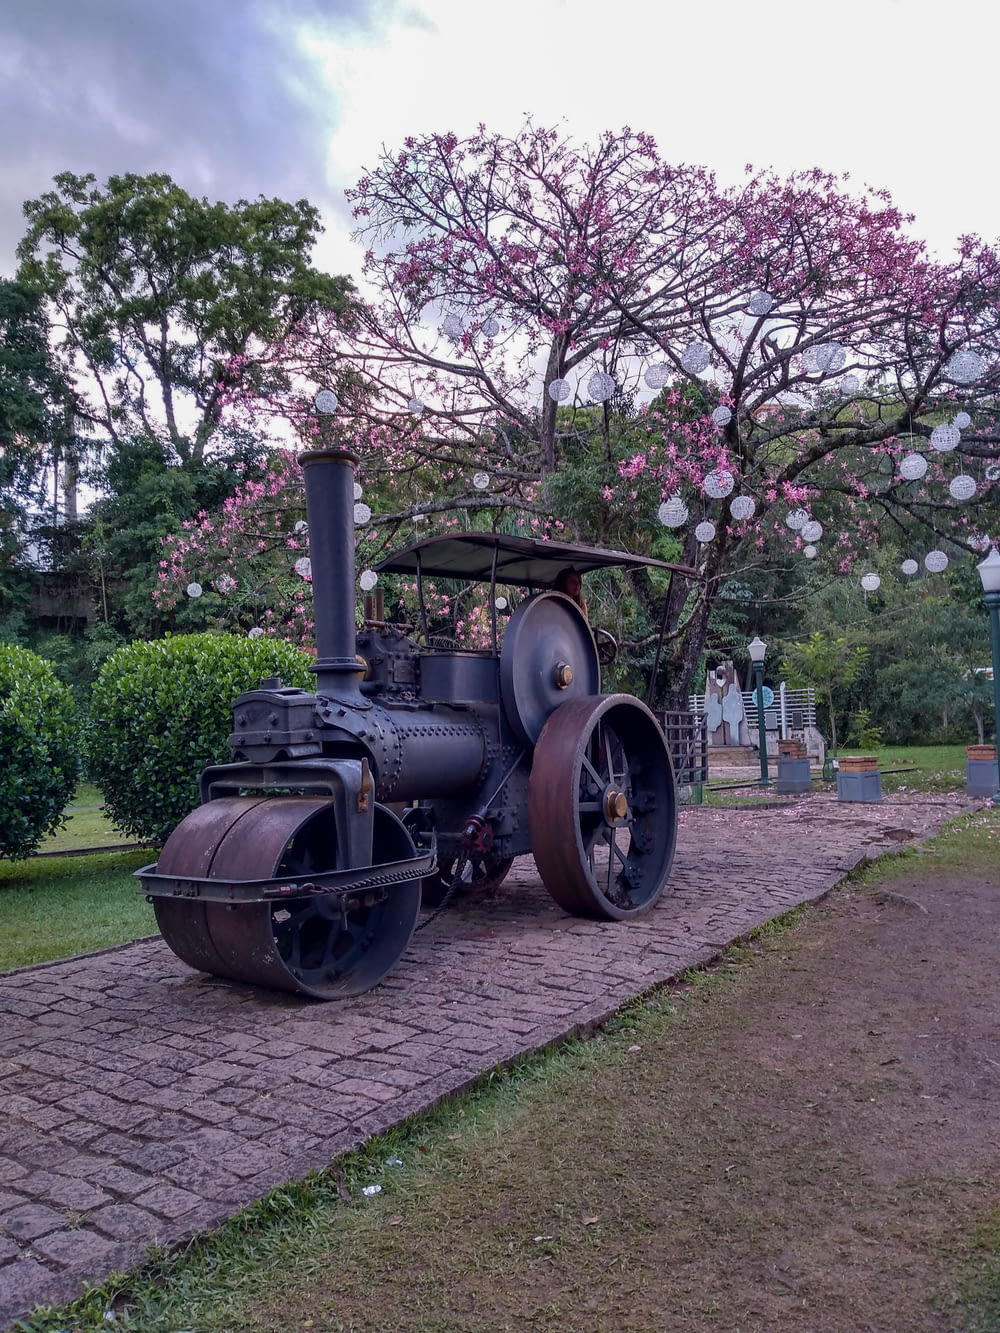 a cannon on a brick path with trees and flowers in the background